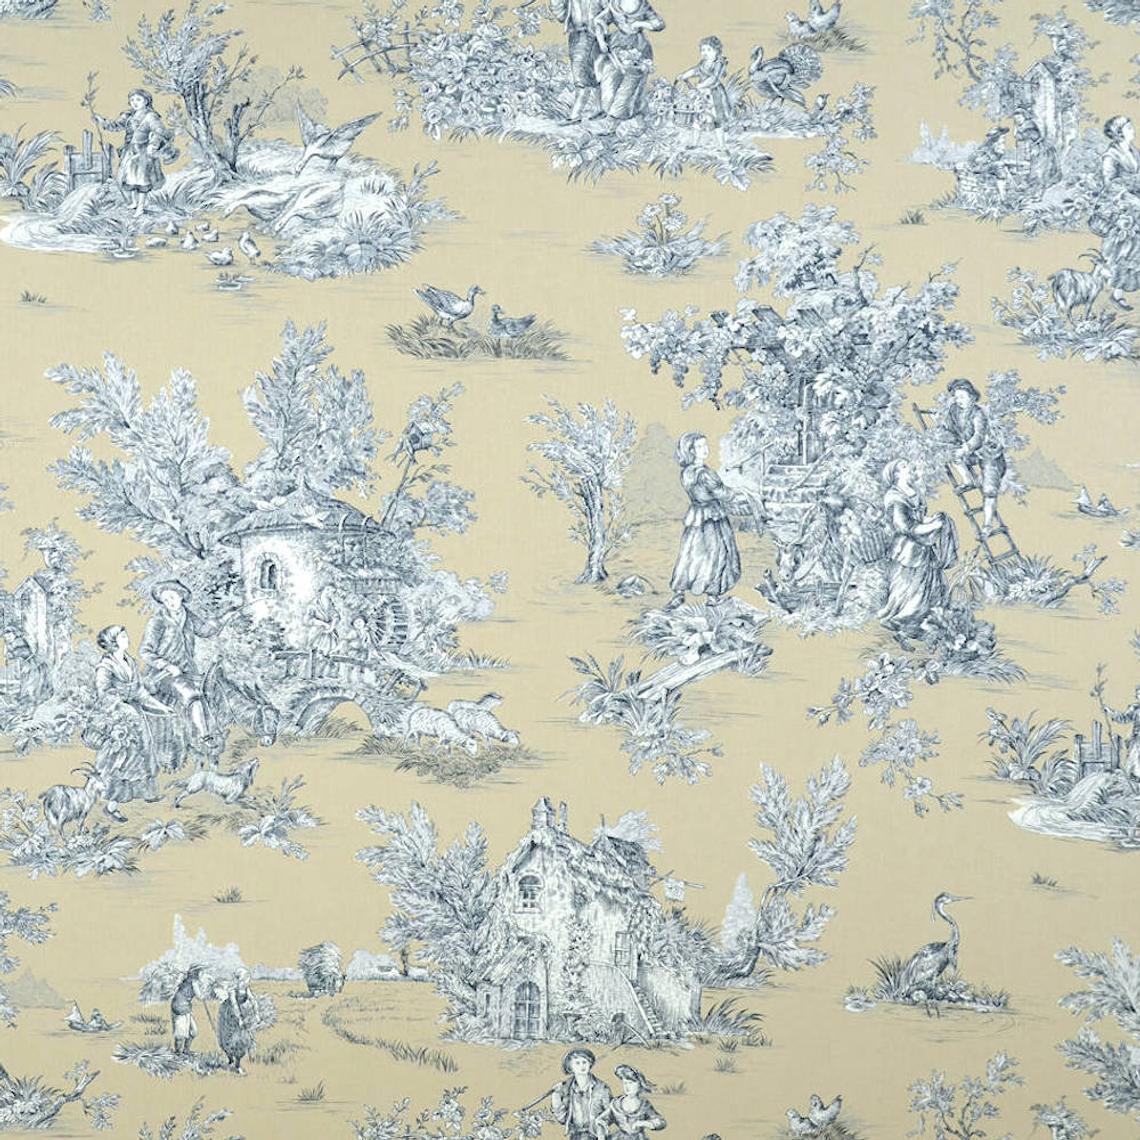 tailored crib skirt in pastorale #88 blue on beige french country toile